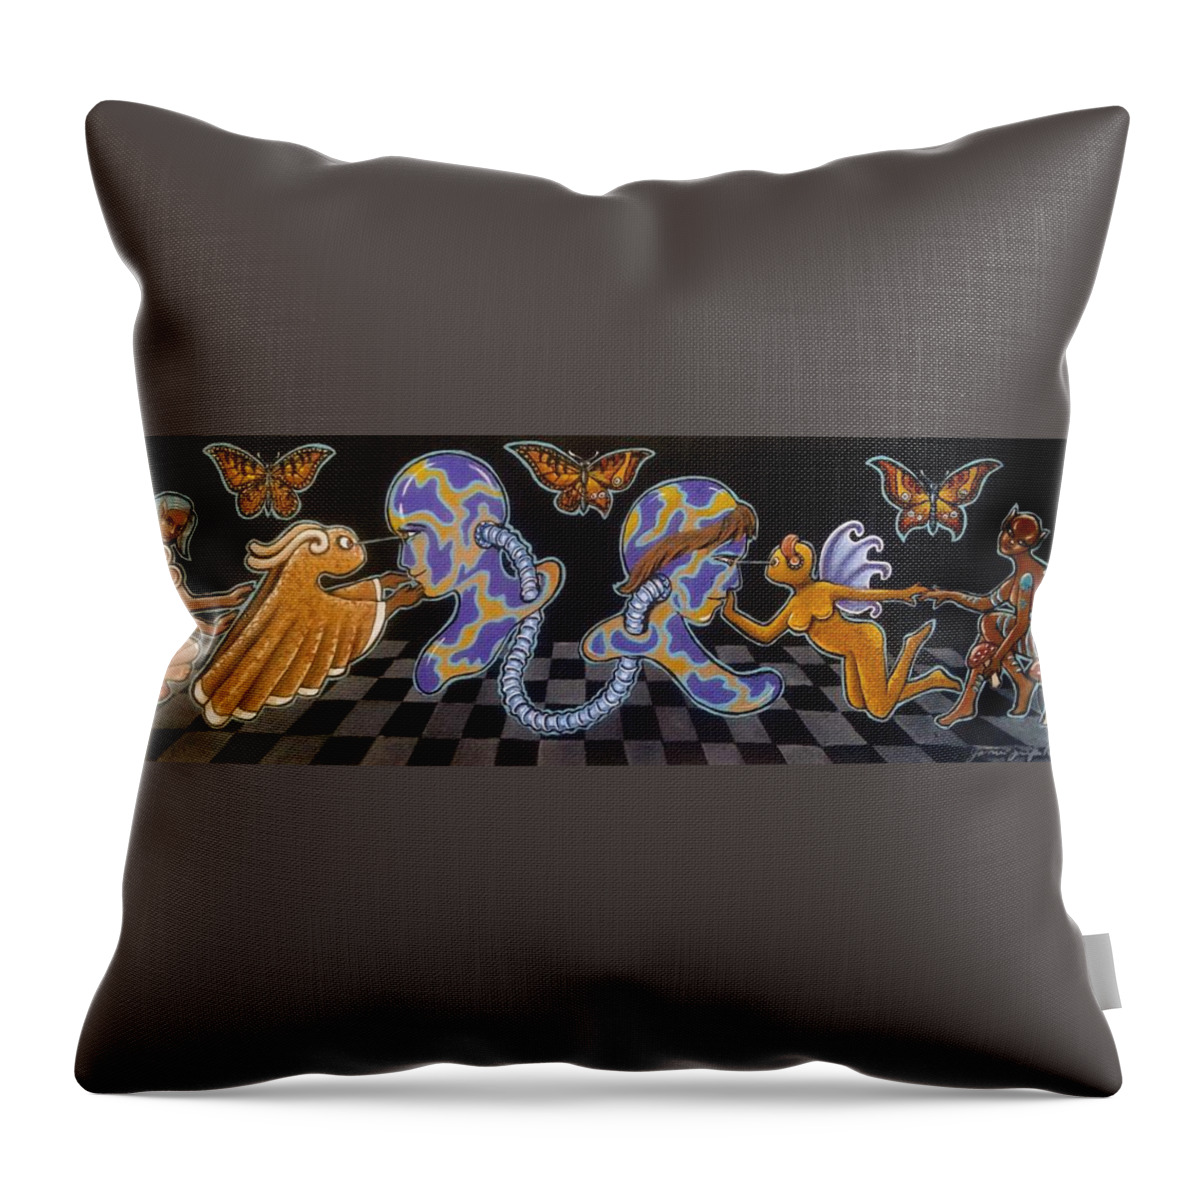 Communication Throw Pillow featuring the painting Non Verbal Communication by James RODERICK